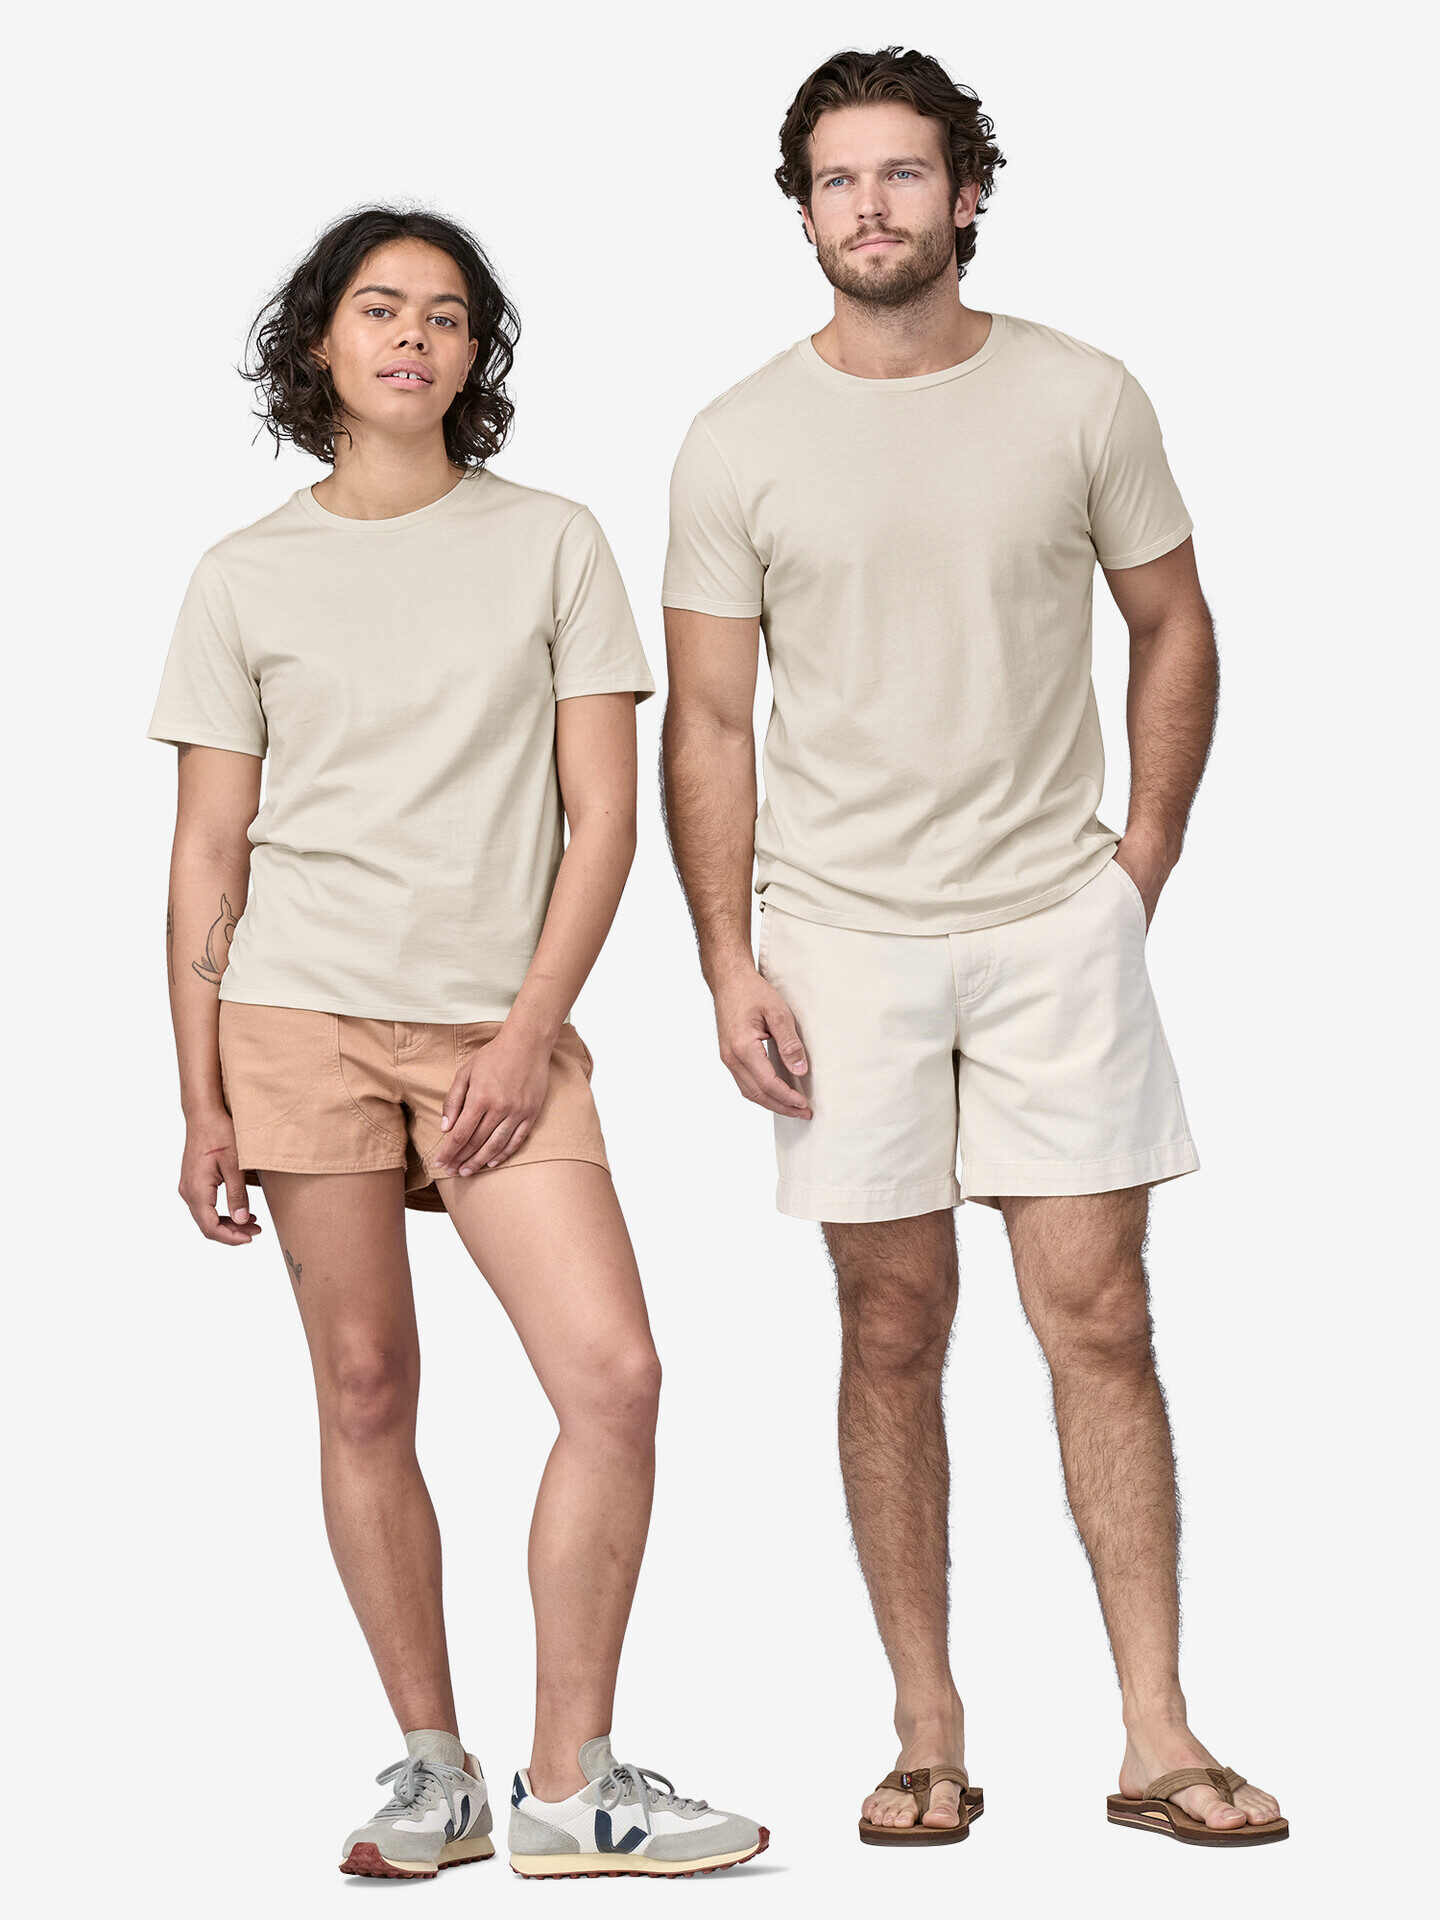 A man and woman wearing beige t - shirts and shorts.